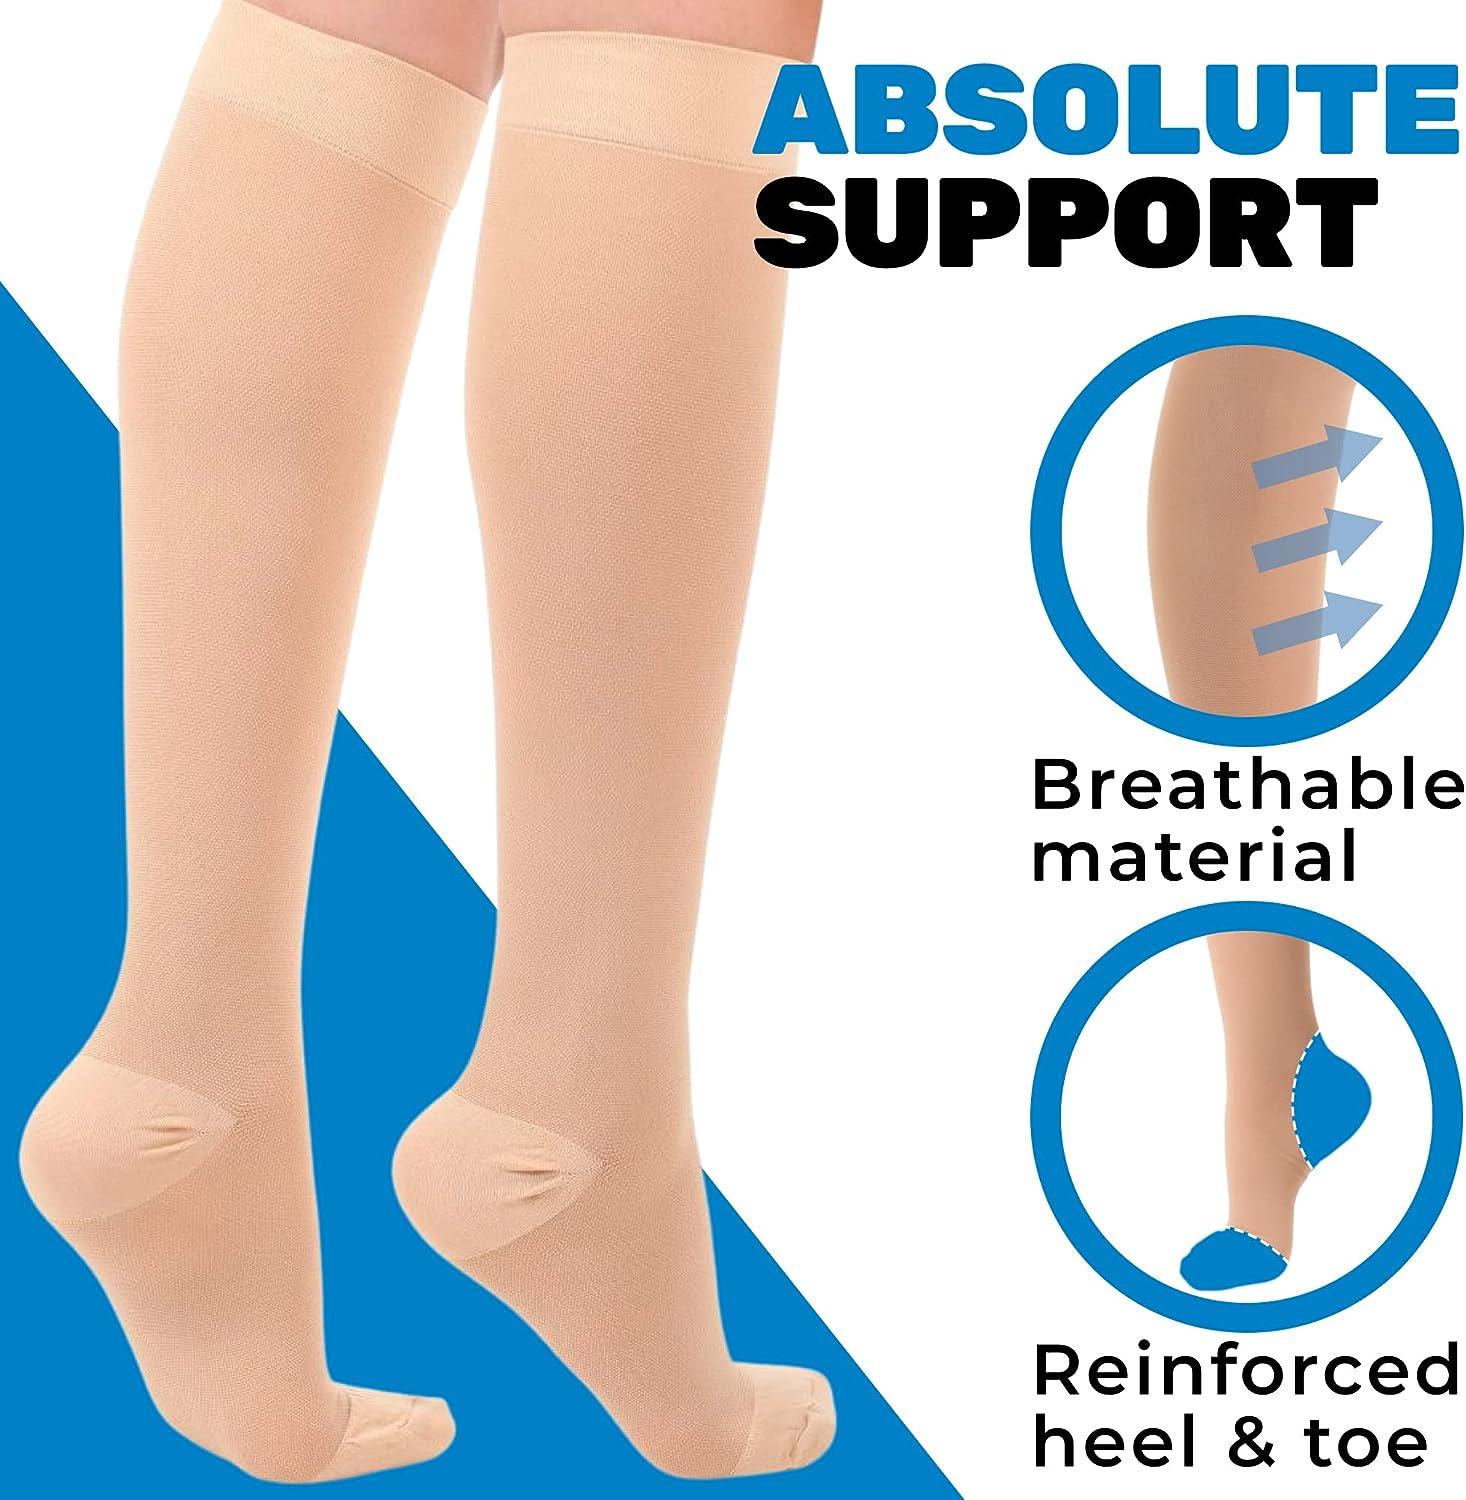 Made in USA - Compression Support Stockings for Women & Men 30-40mmHg -  Unisex Knee Hi Compression Socks 30-40mmHg for Airplane Flight Travel Work  - Beige, Large Large (1 Pair) Beige